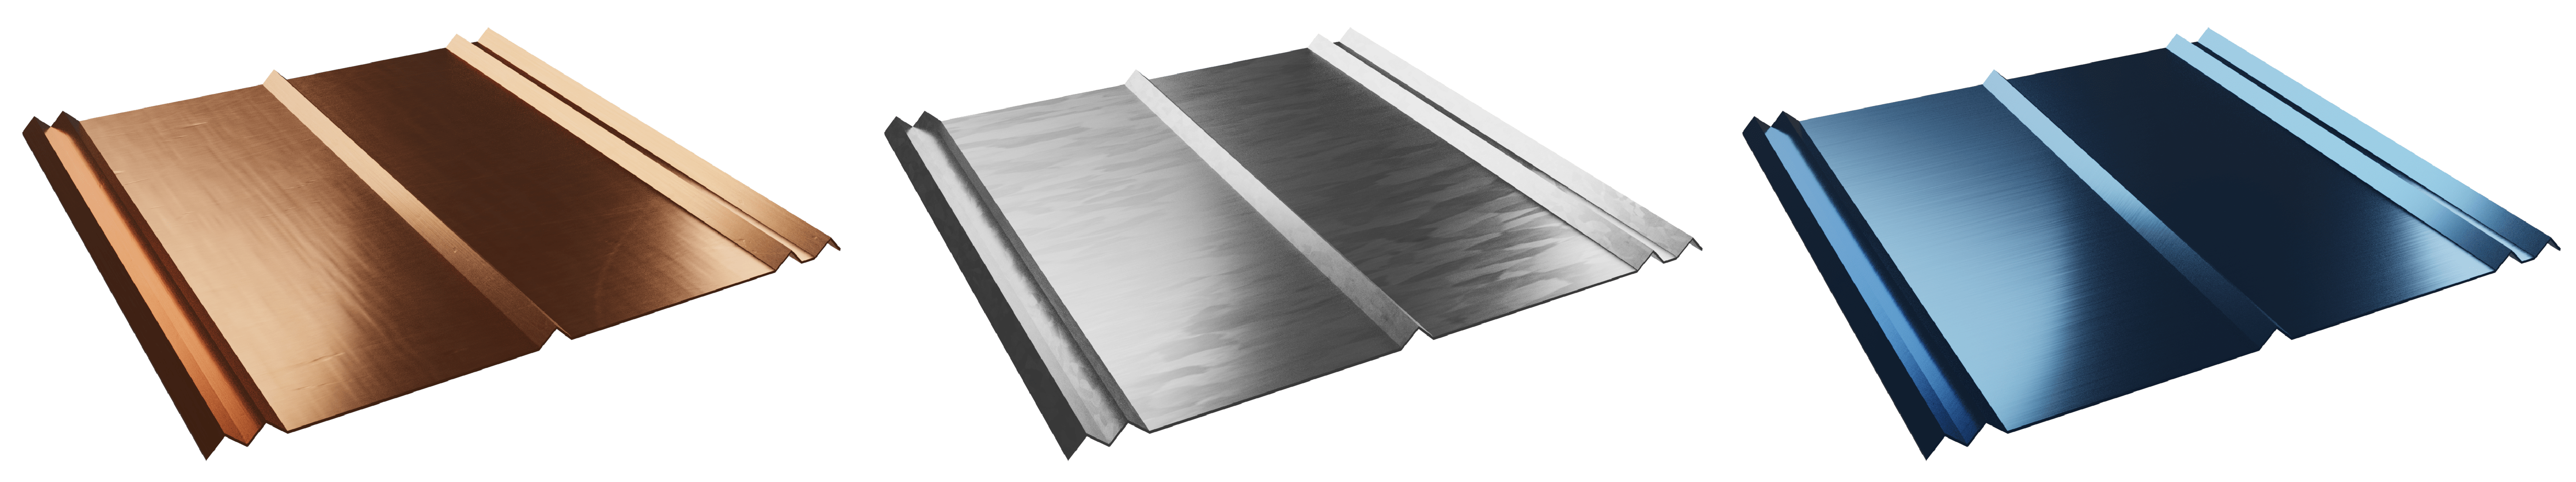 standing seam roofing panels